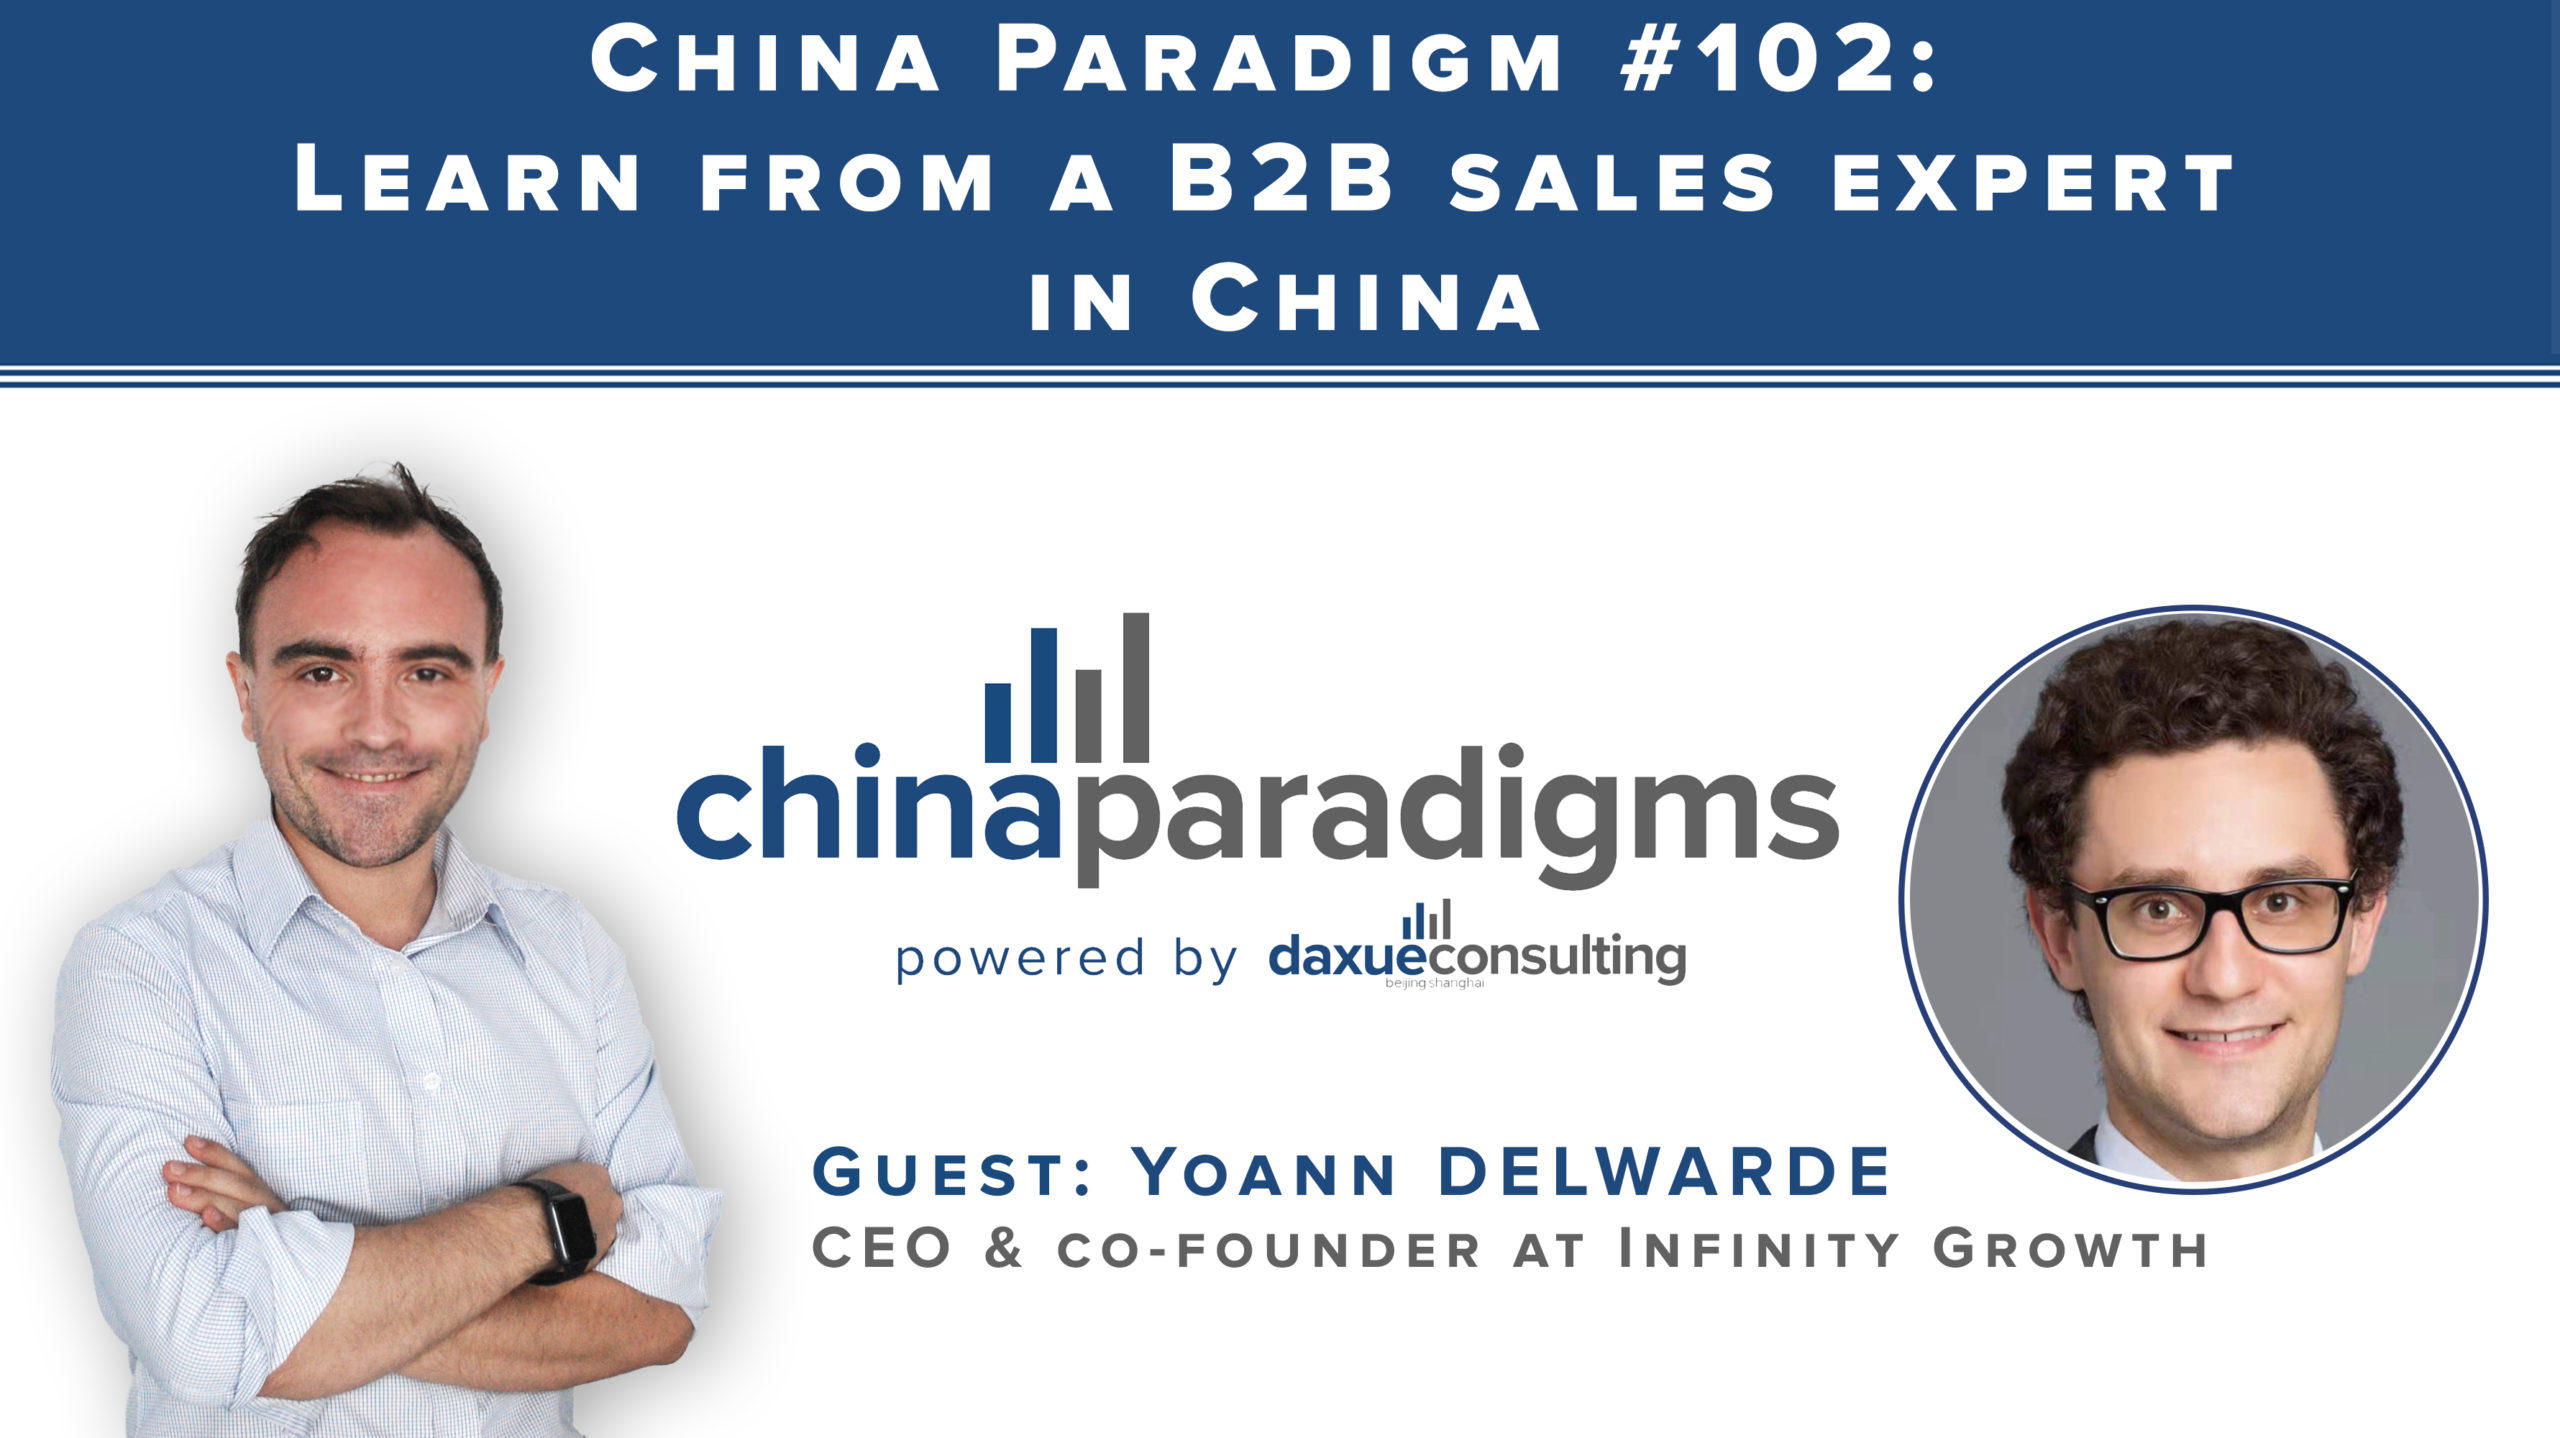 China Paradigm 102: Learn from a B2B sales expert in China